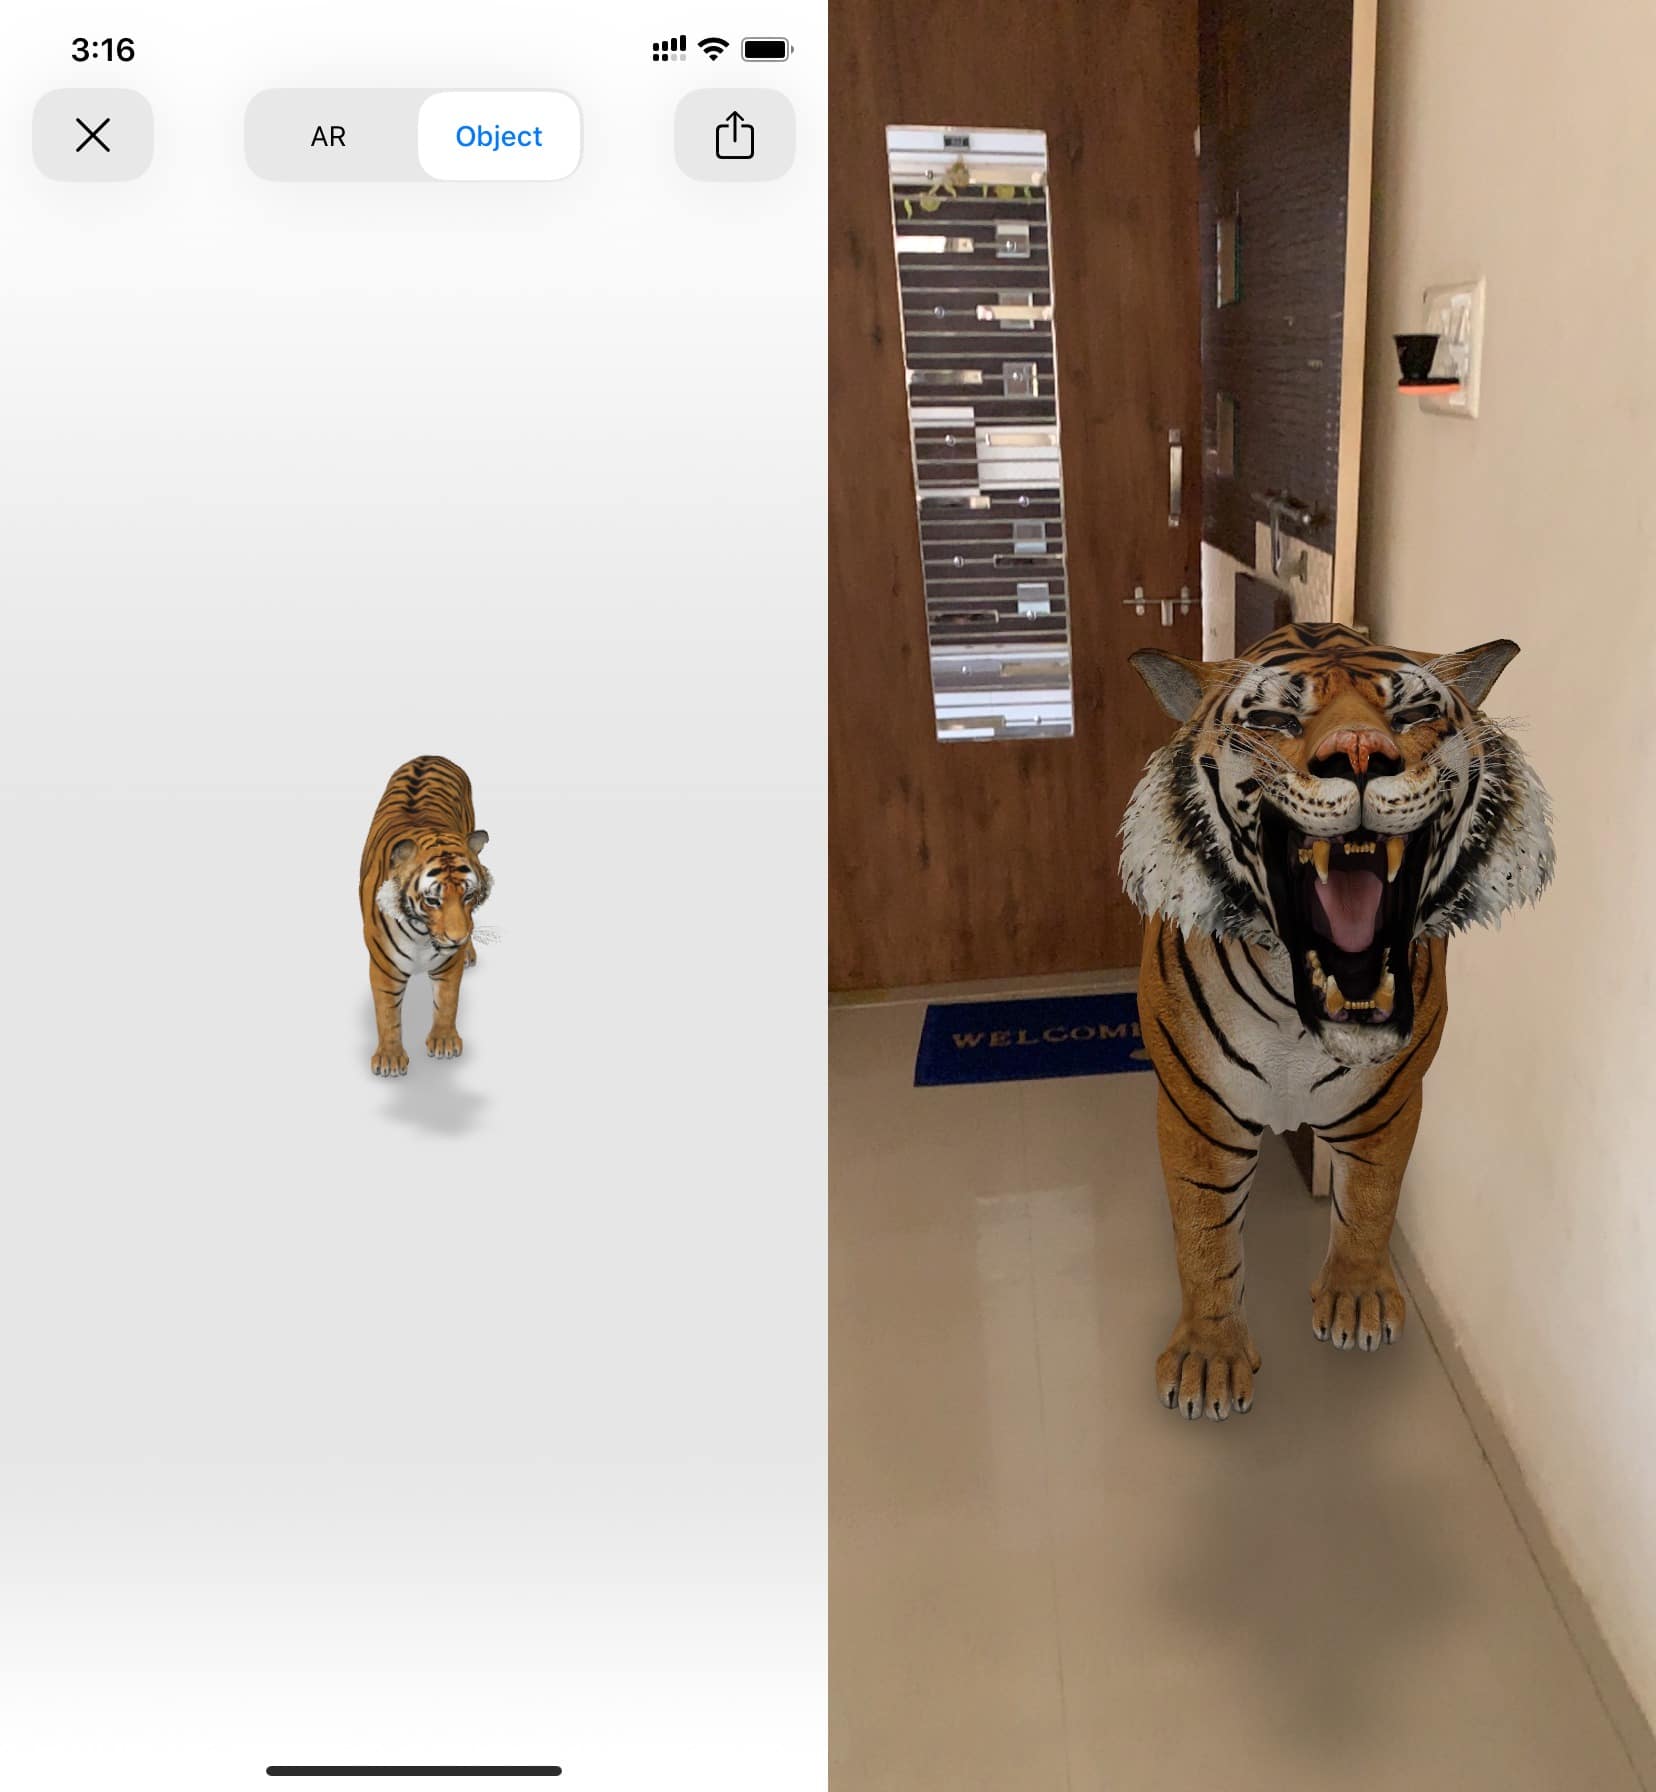 How to Use Your iPhone to Bring Life-Sized 3D Animals In Your Living Room